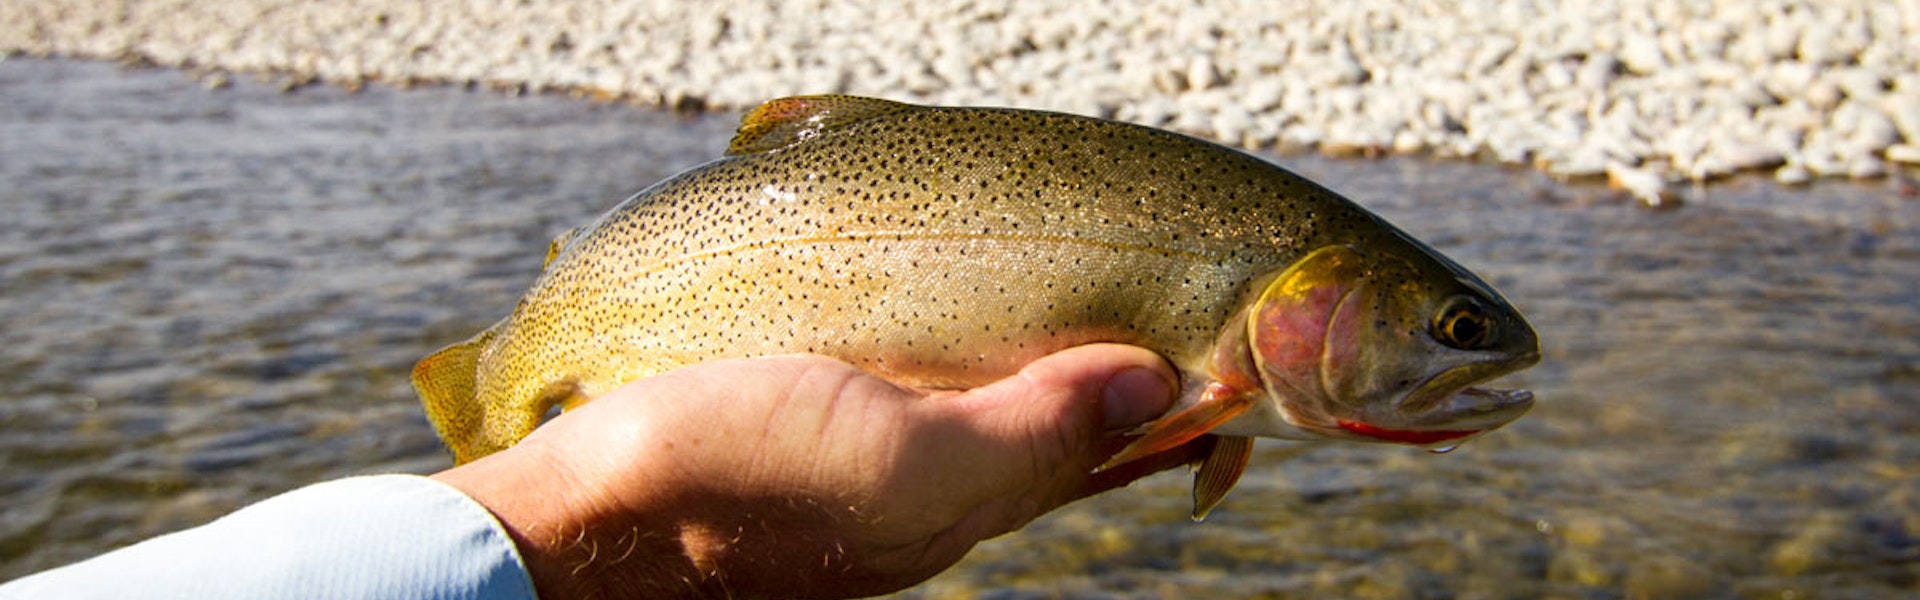 Cutthroat fish caught in the Snake River